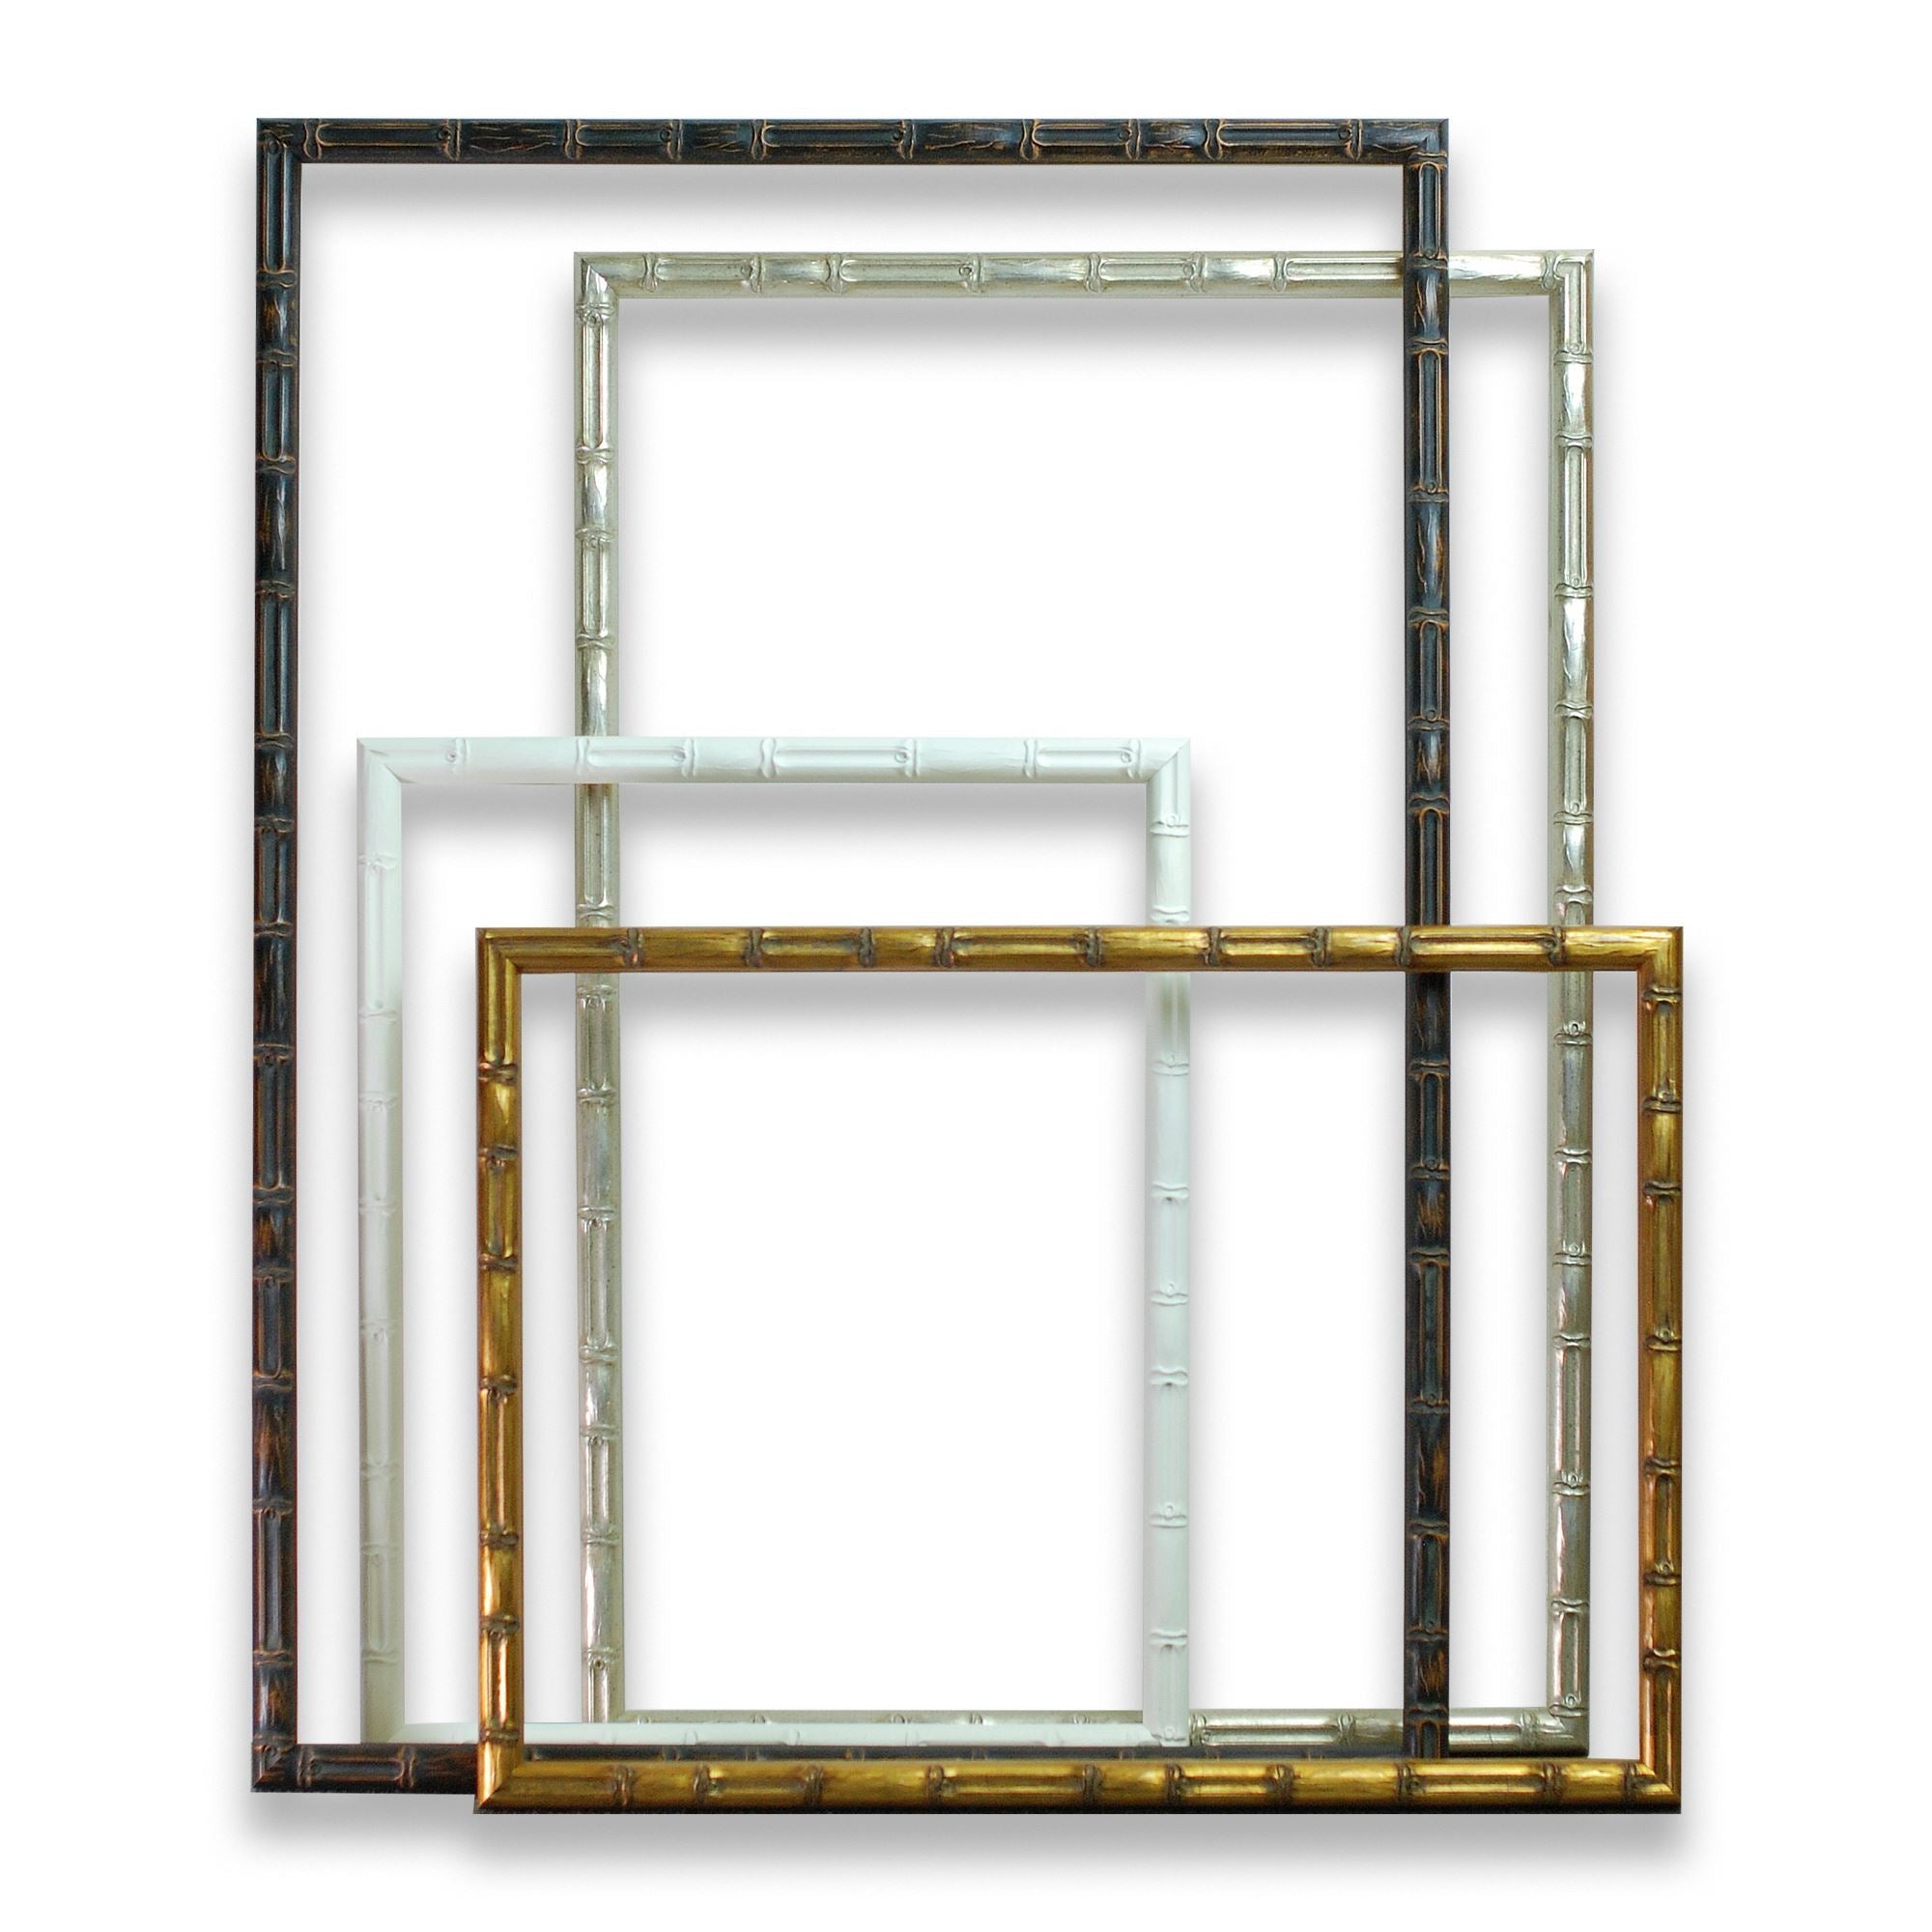 Bamboo Style photo frame, B1(700x1000mm), B2(500x700mm), B3(350x500mm) with Pers